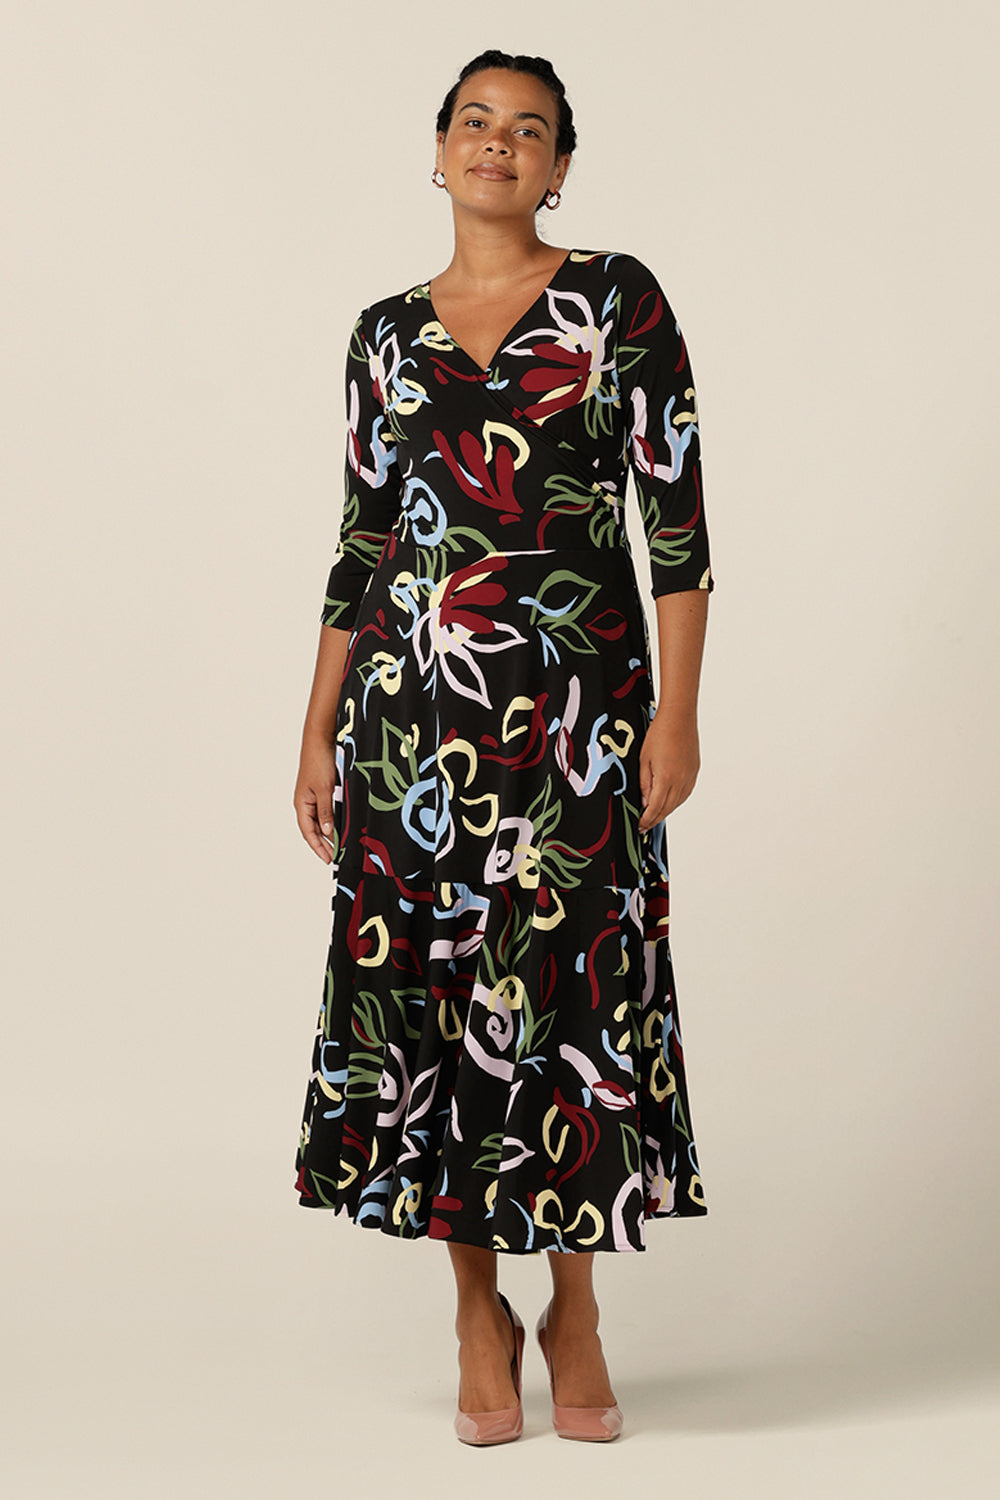 A size 12 woman wears a reversible wrap dress with 3/4 sleeves. Featuring a midi-length skirt with ruffle hem and 3/4 length sleeves, this printed jersey dress wears well as a work dress or everyday dress.